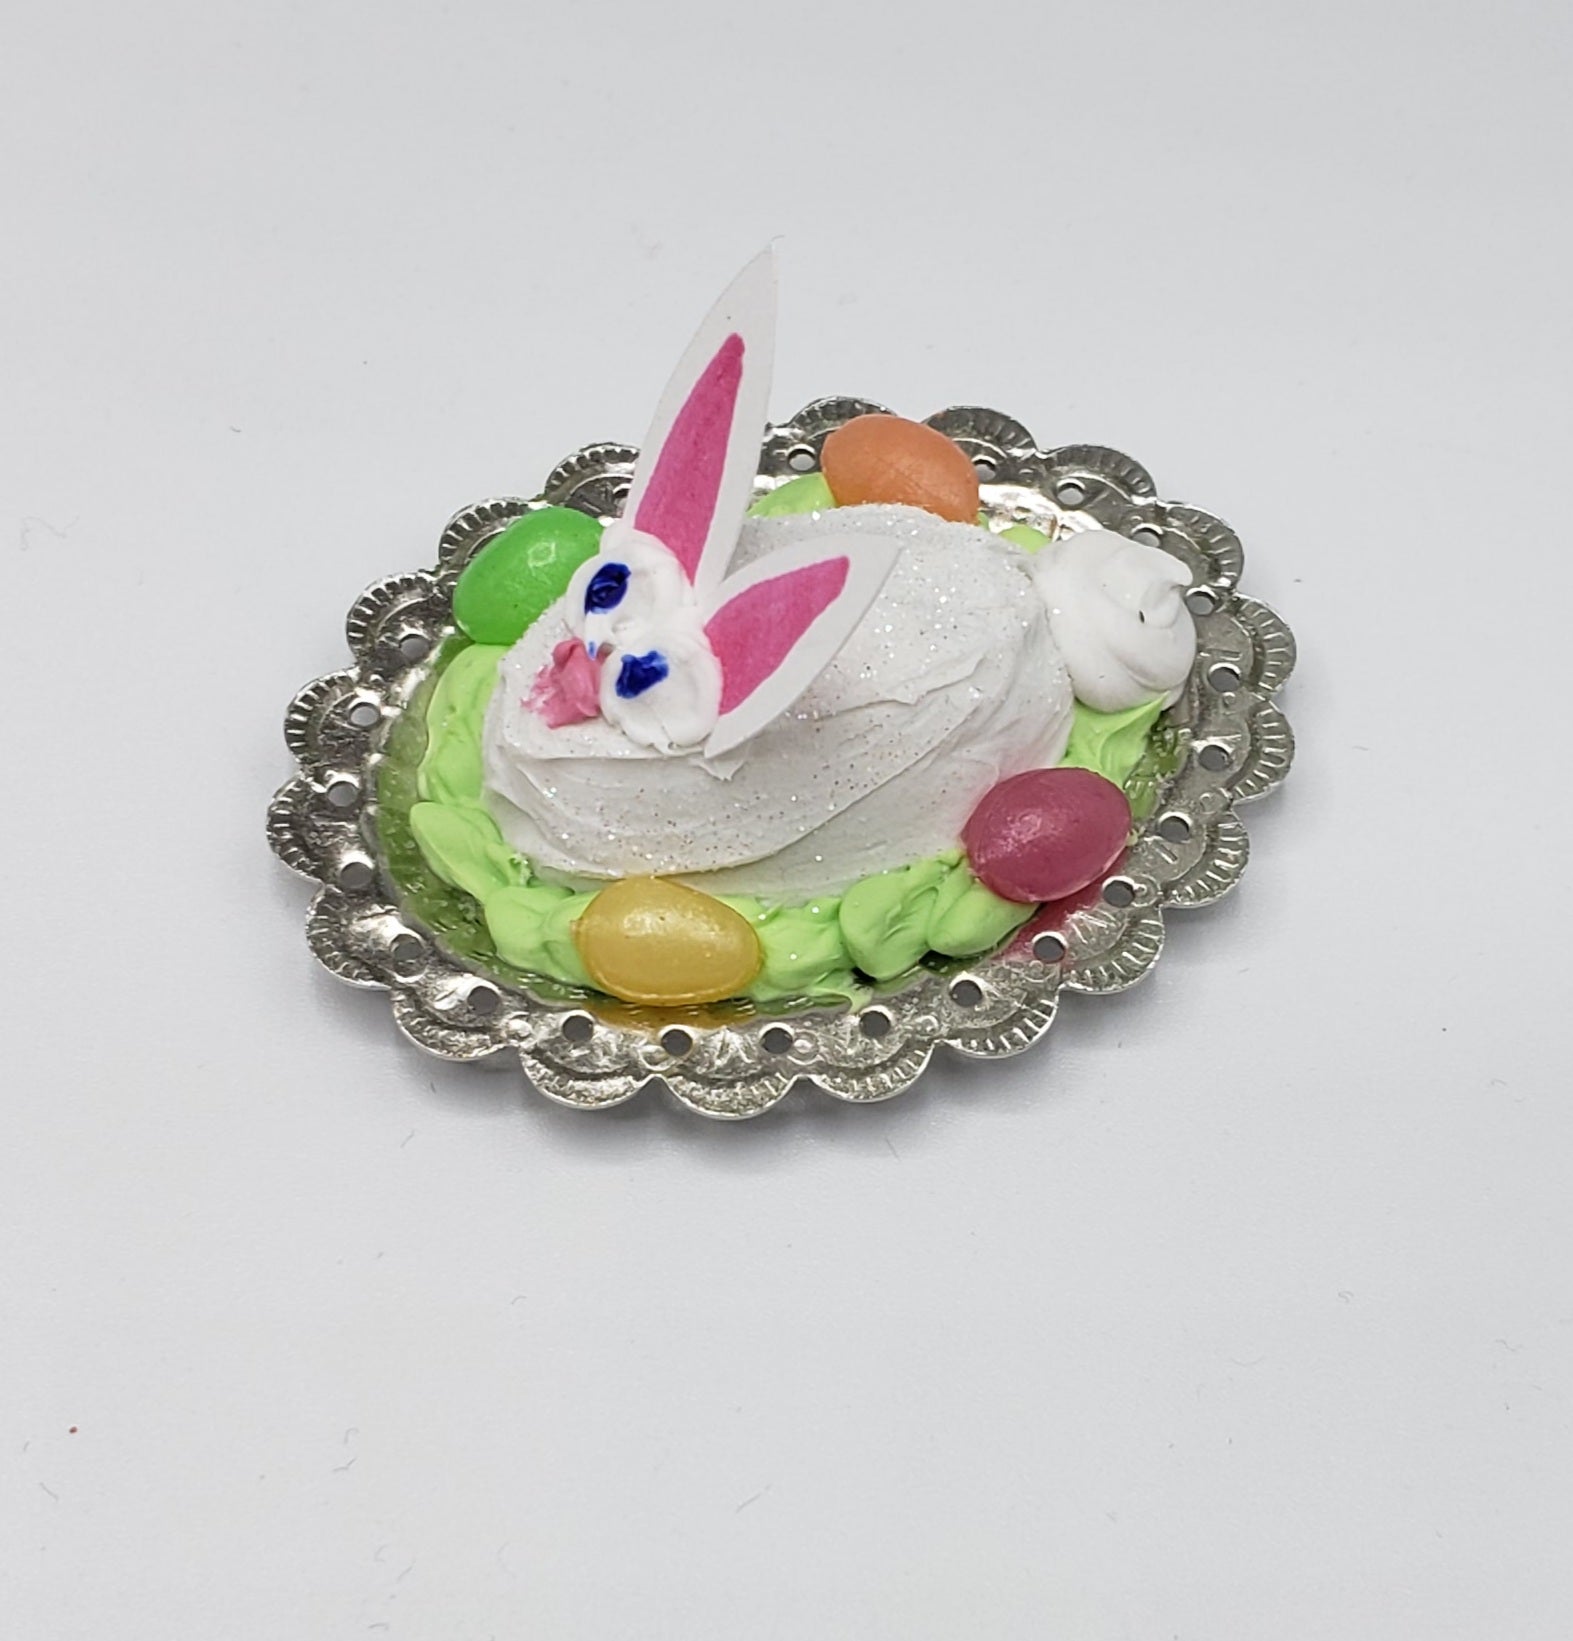 Small bunny cake for dolls